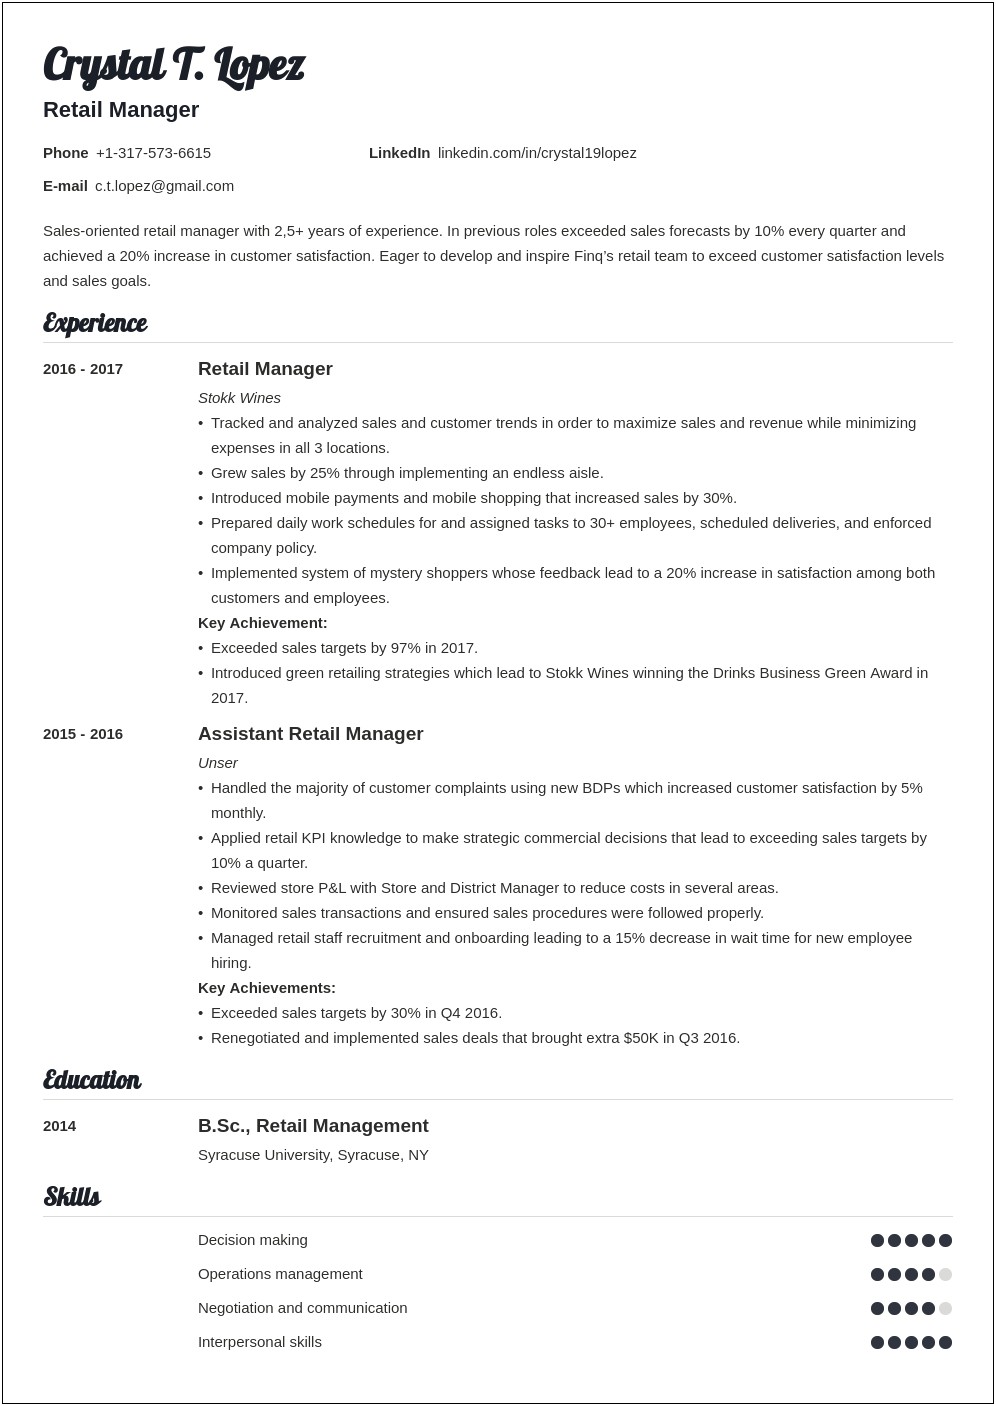 Professional Store Manager Resume Examples